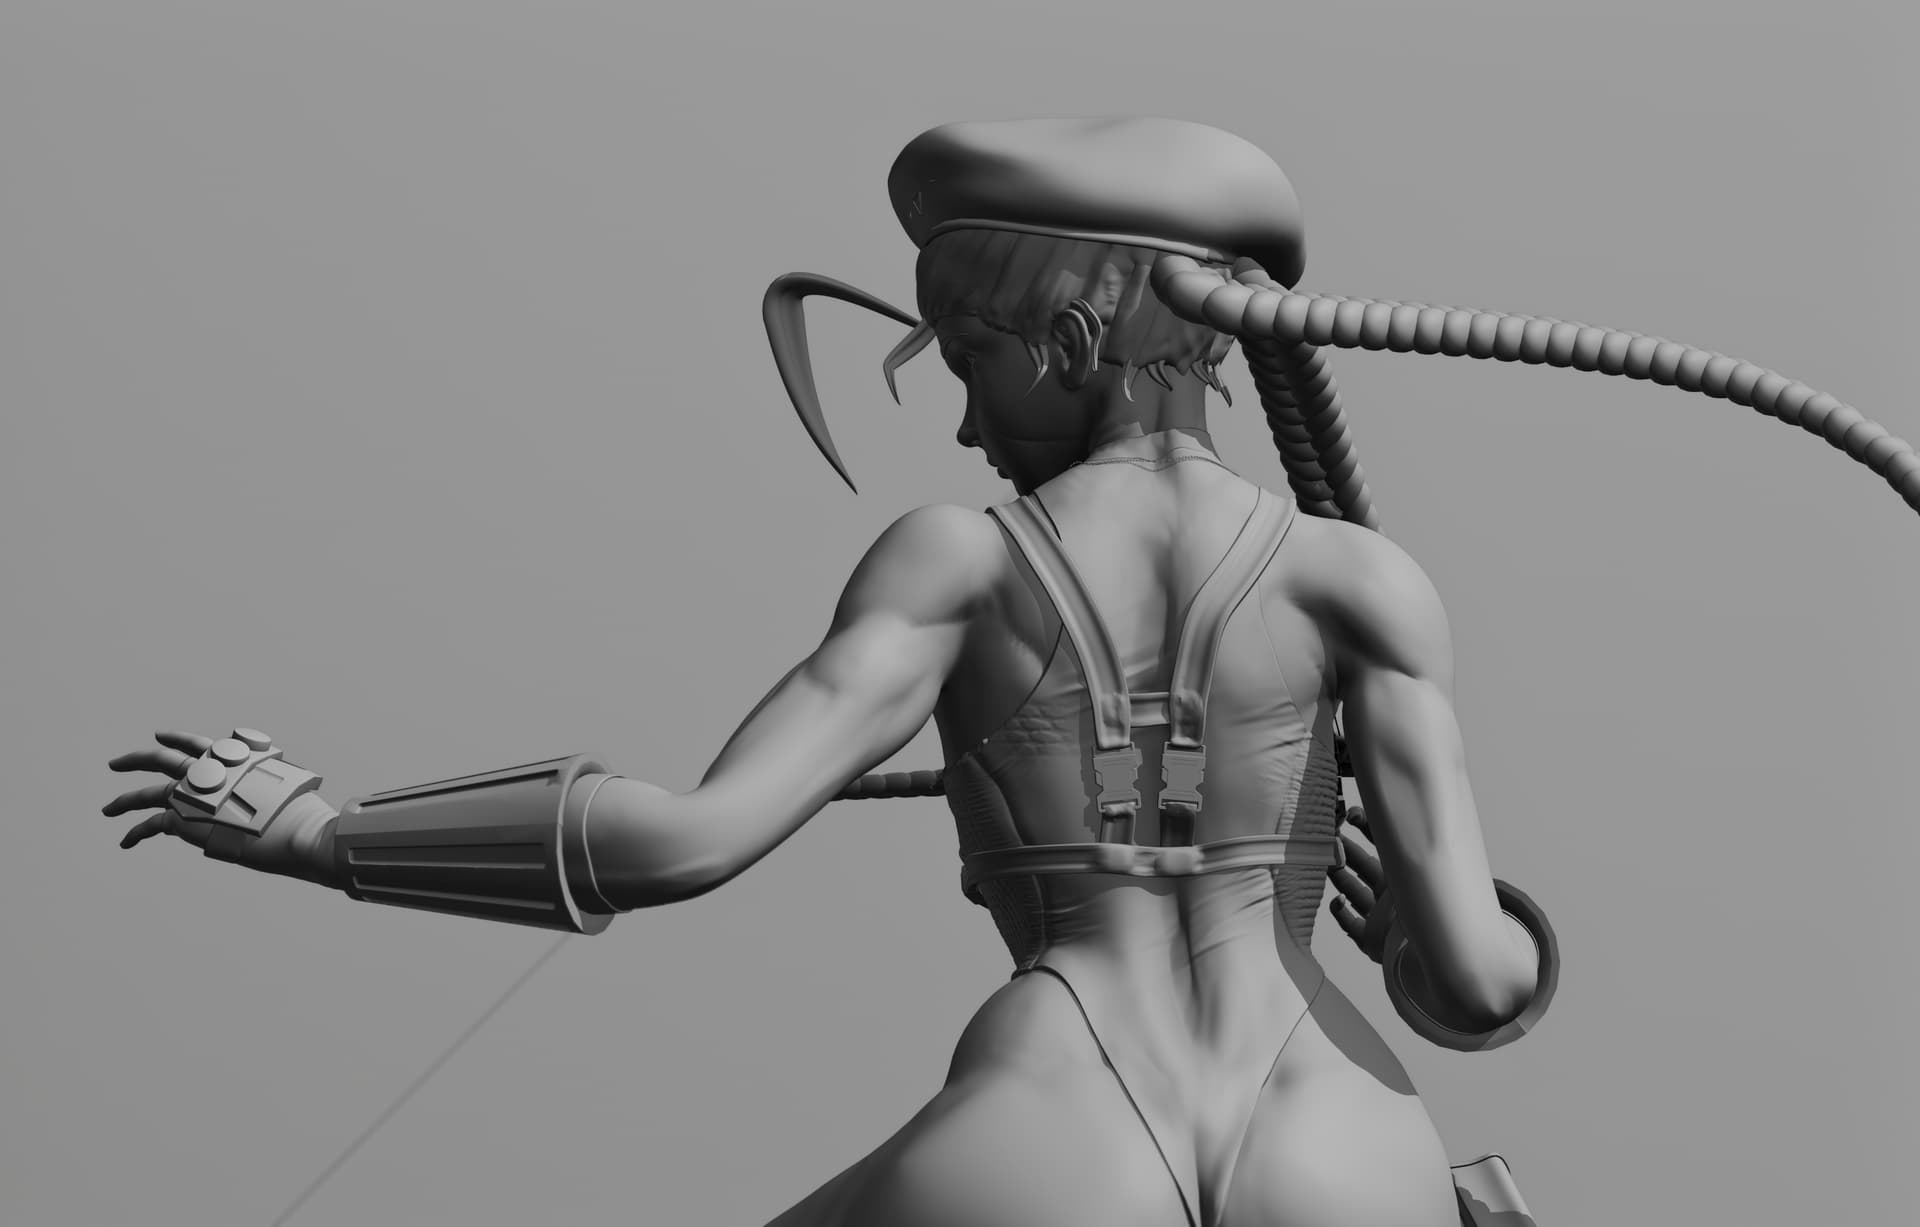 Cammy From Street Fighter💛 - Finished Projects - Blender Artists Community